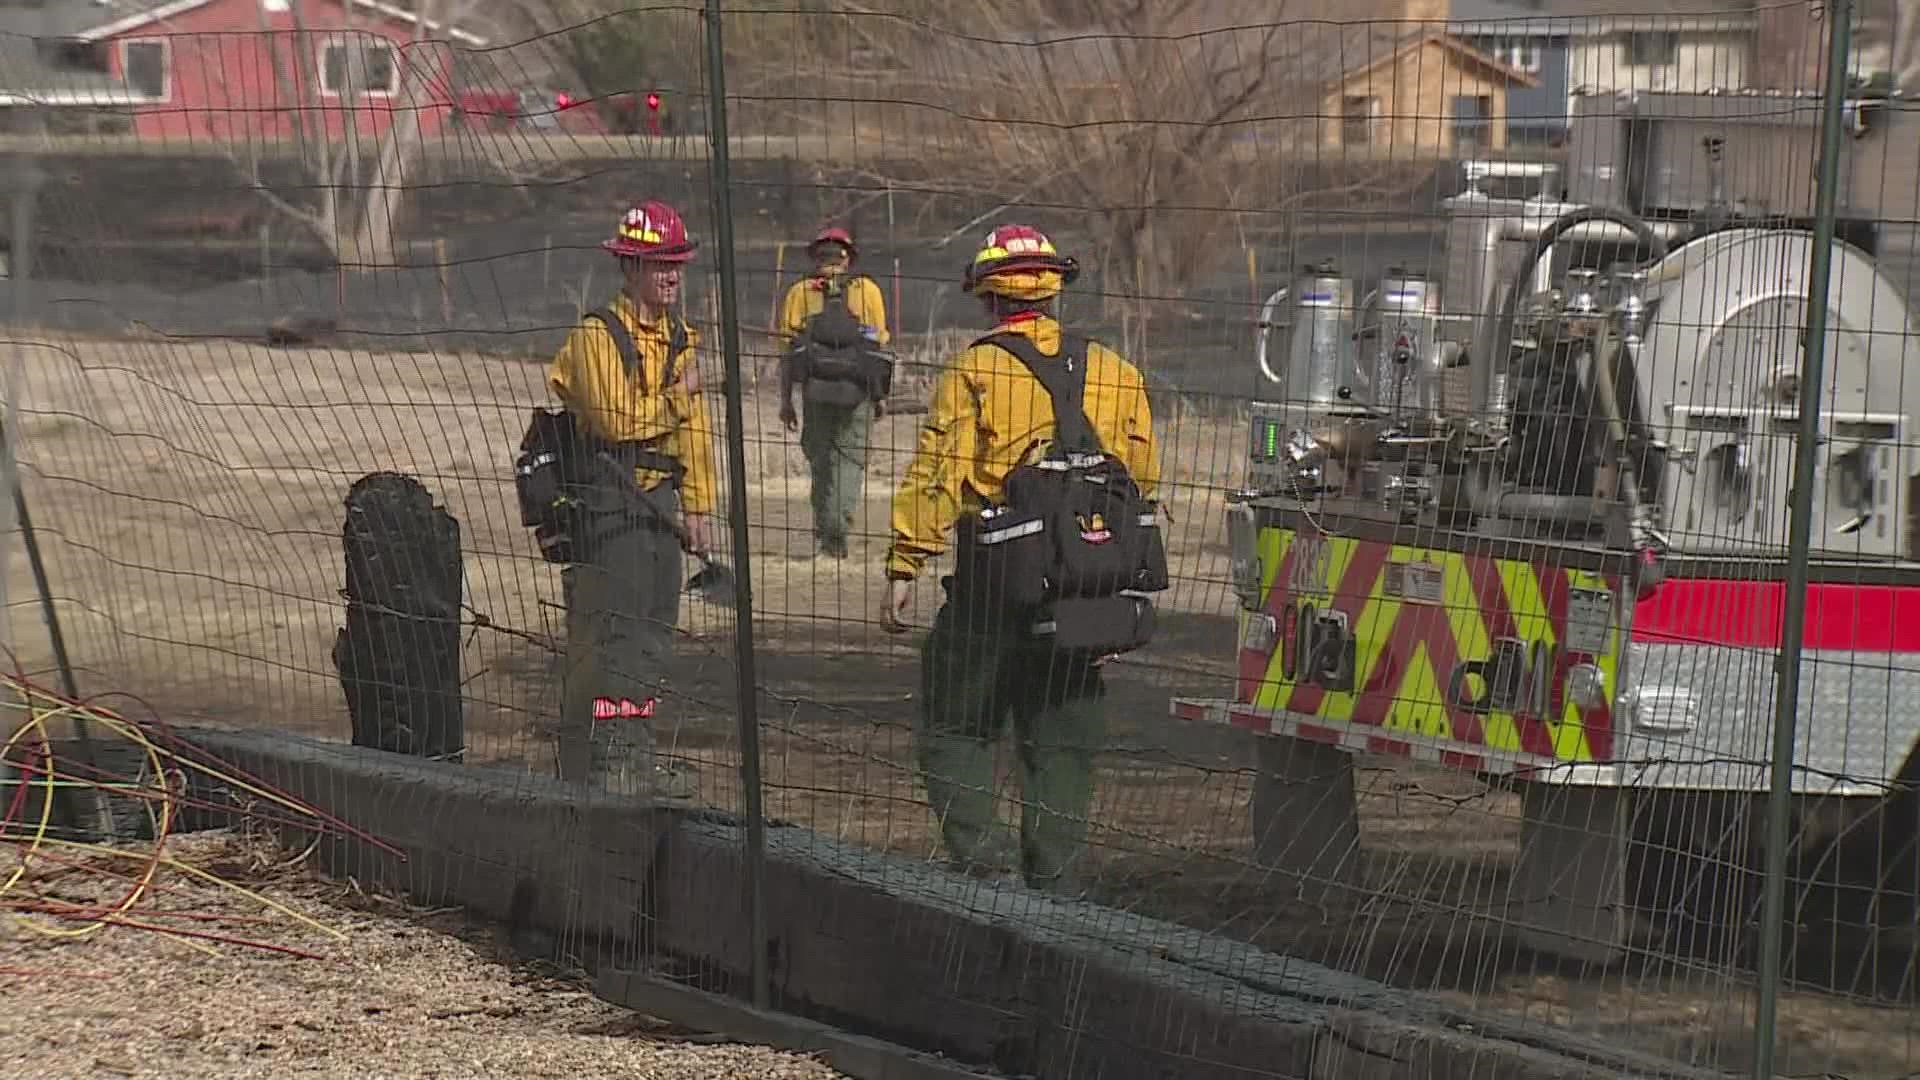 9News reporter Luis de Leon is in Boulder, where firefighters have been facing longs days.